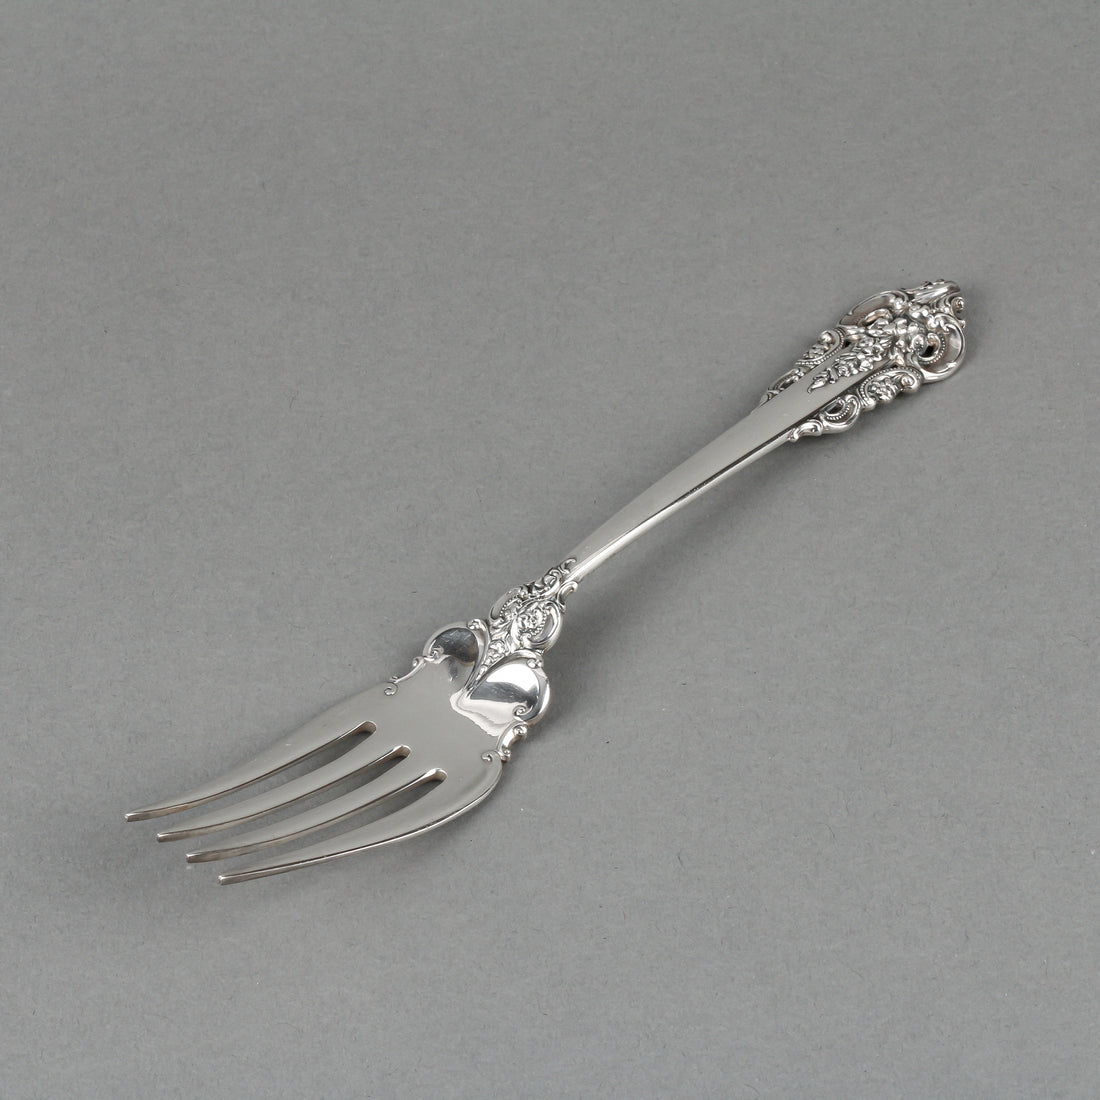 WALLACE Grand Baroque Sterling Silver Serving Fork